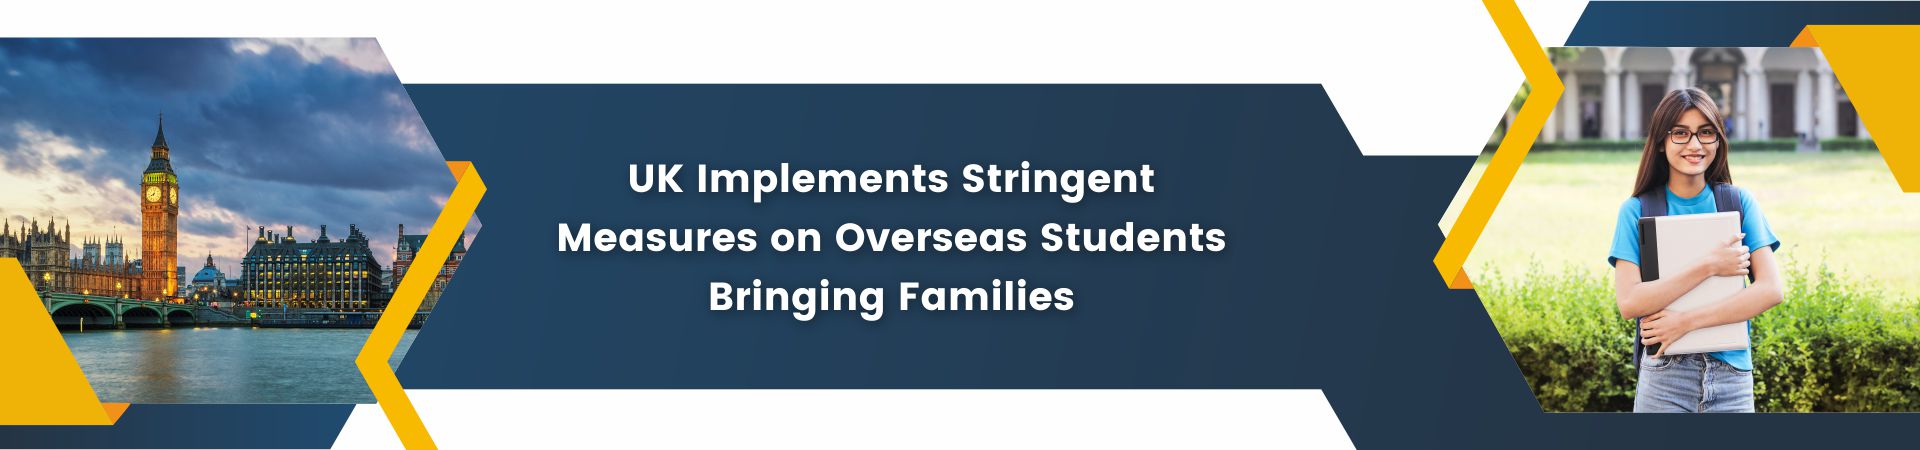 UK Implements Stringent Measures on Overseas Students Bringing Families